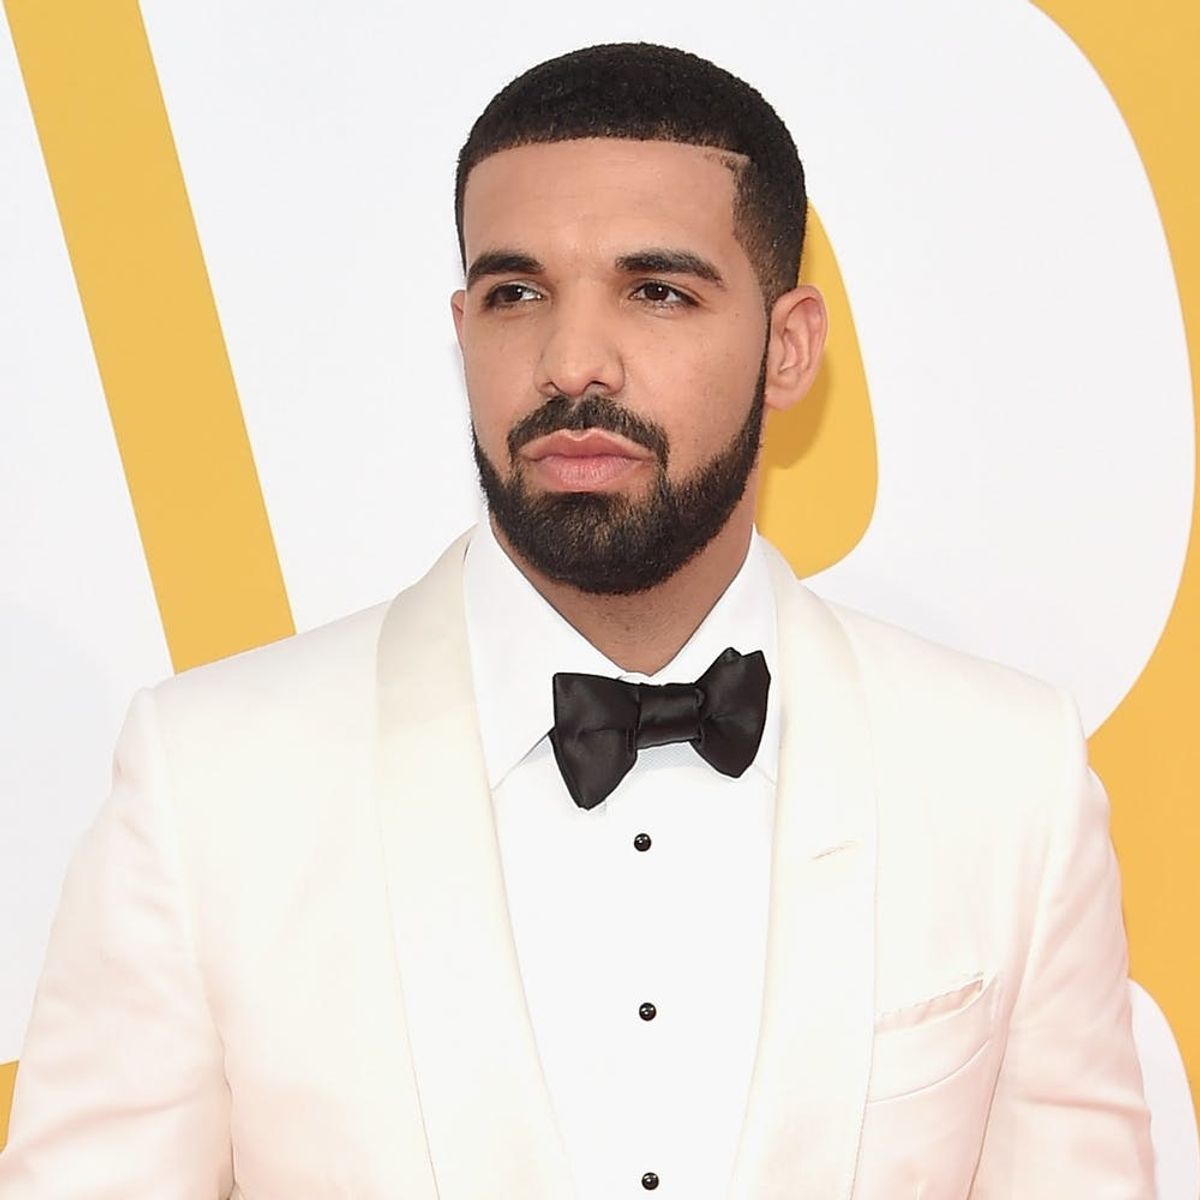 Watch Drake Call Out a Man for Groping Women at His Concert